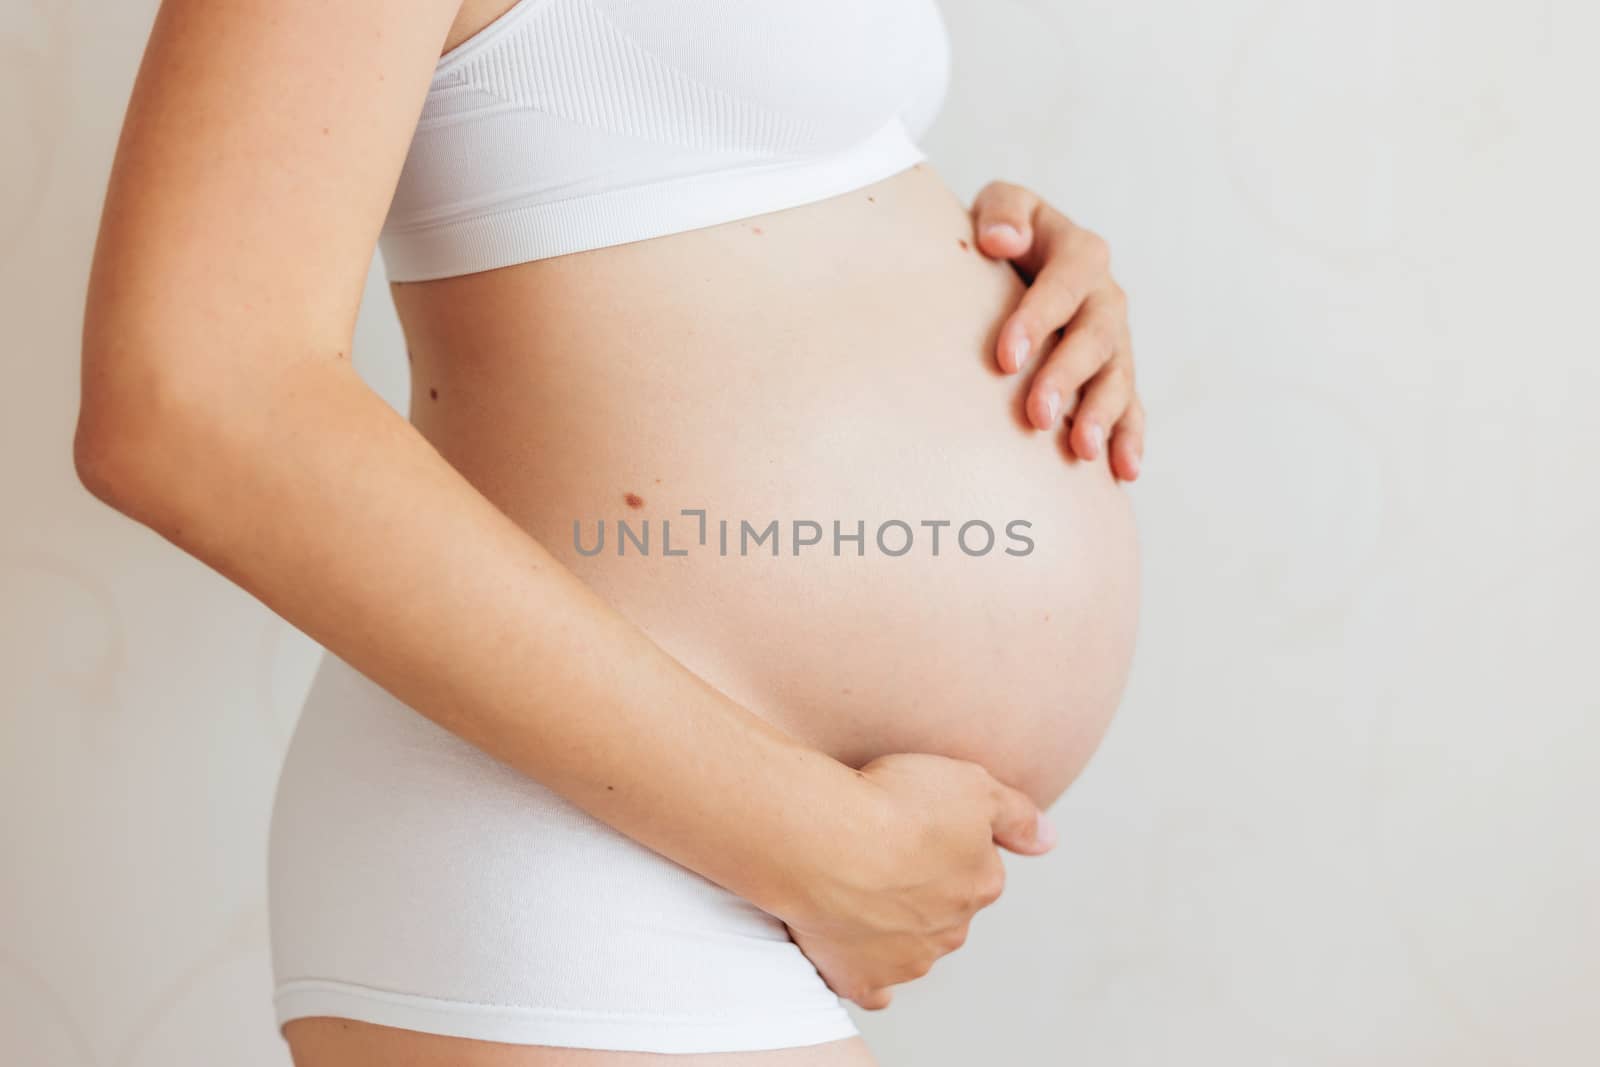 Pregnant woman with many birthmarks (nevus) in white underwear. Young woman expecting a baby.